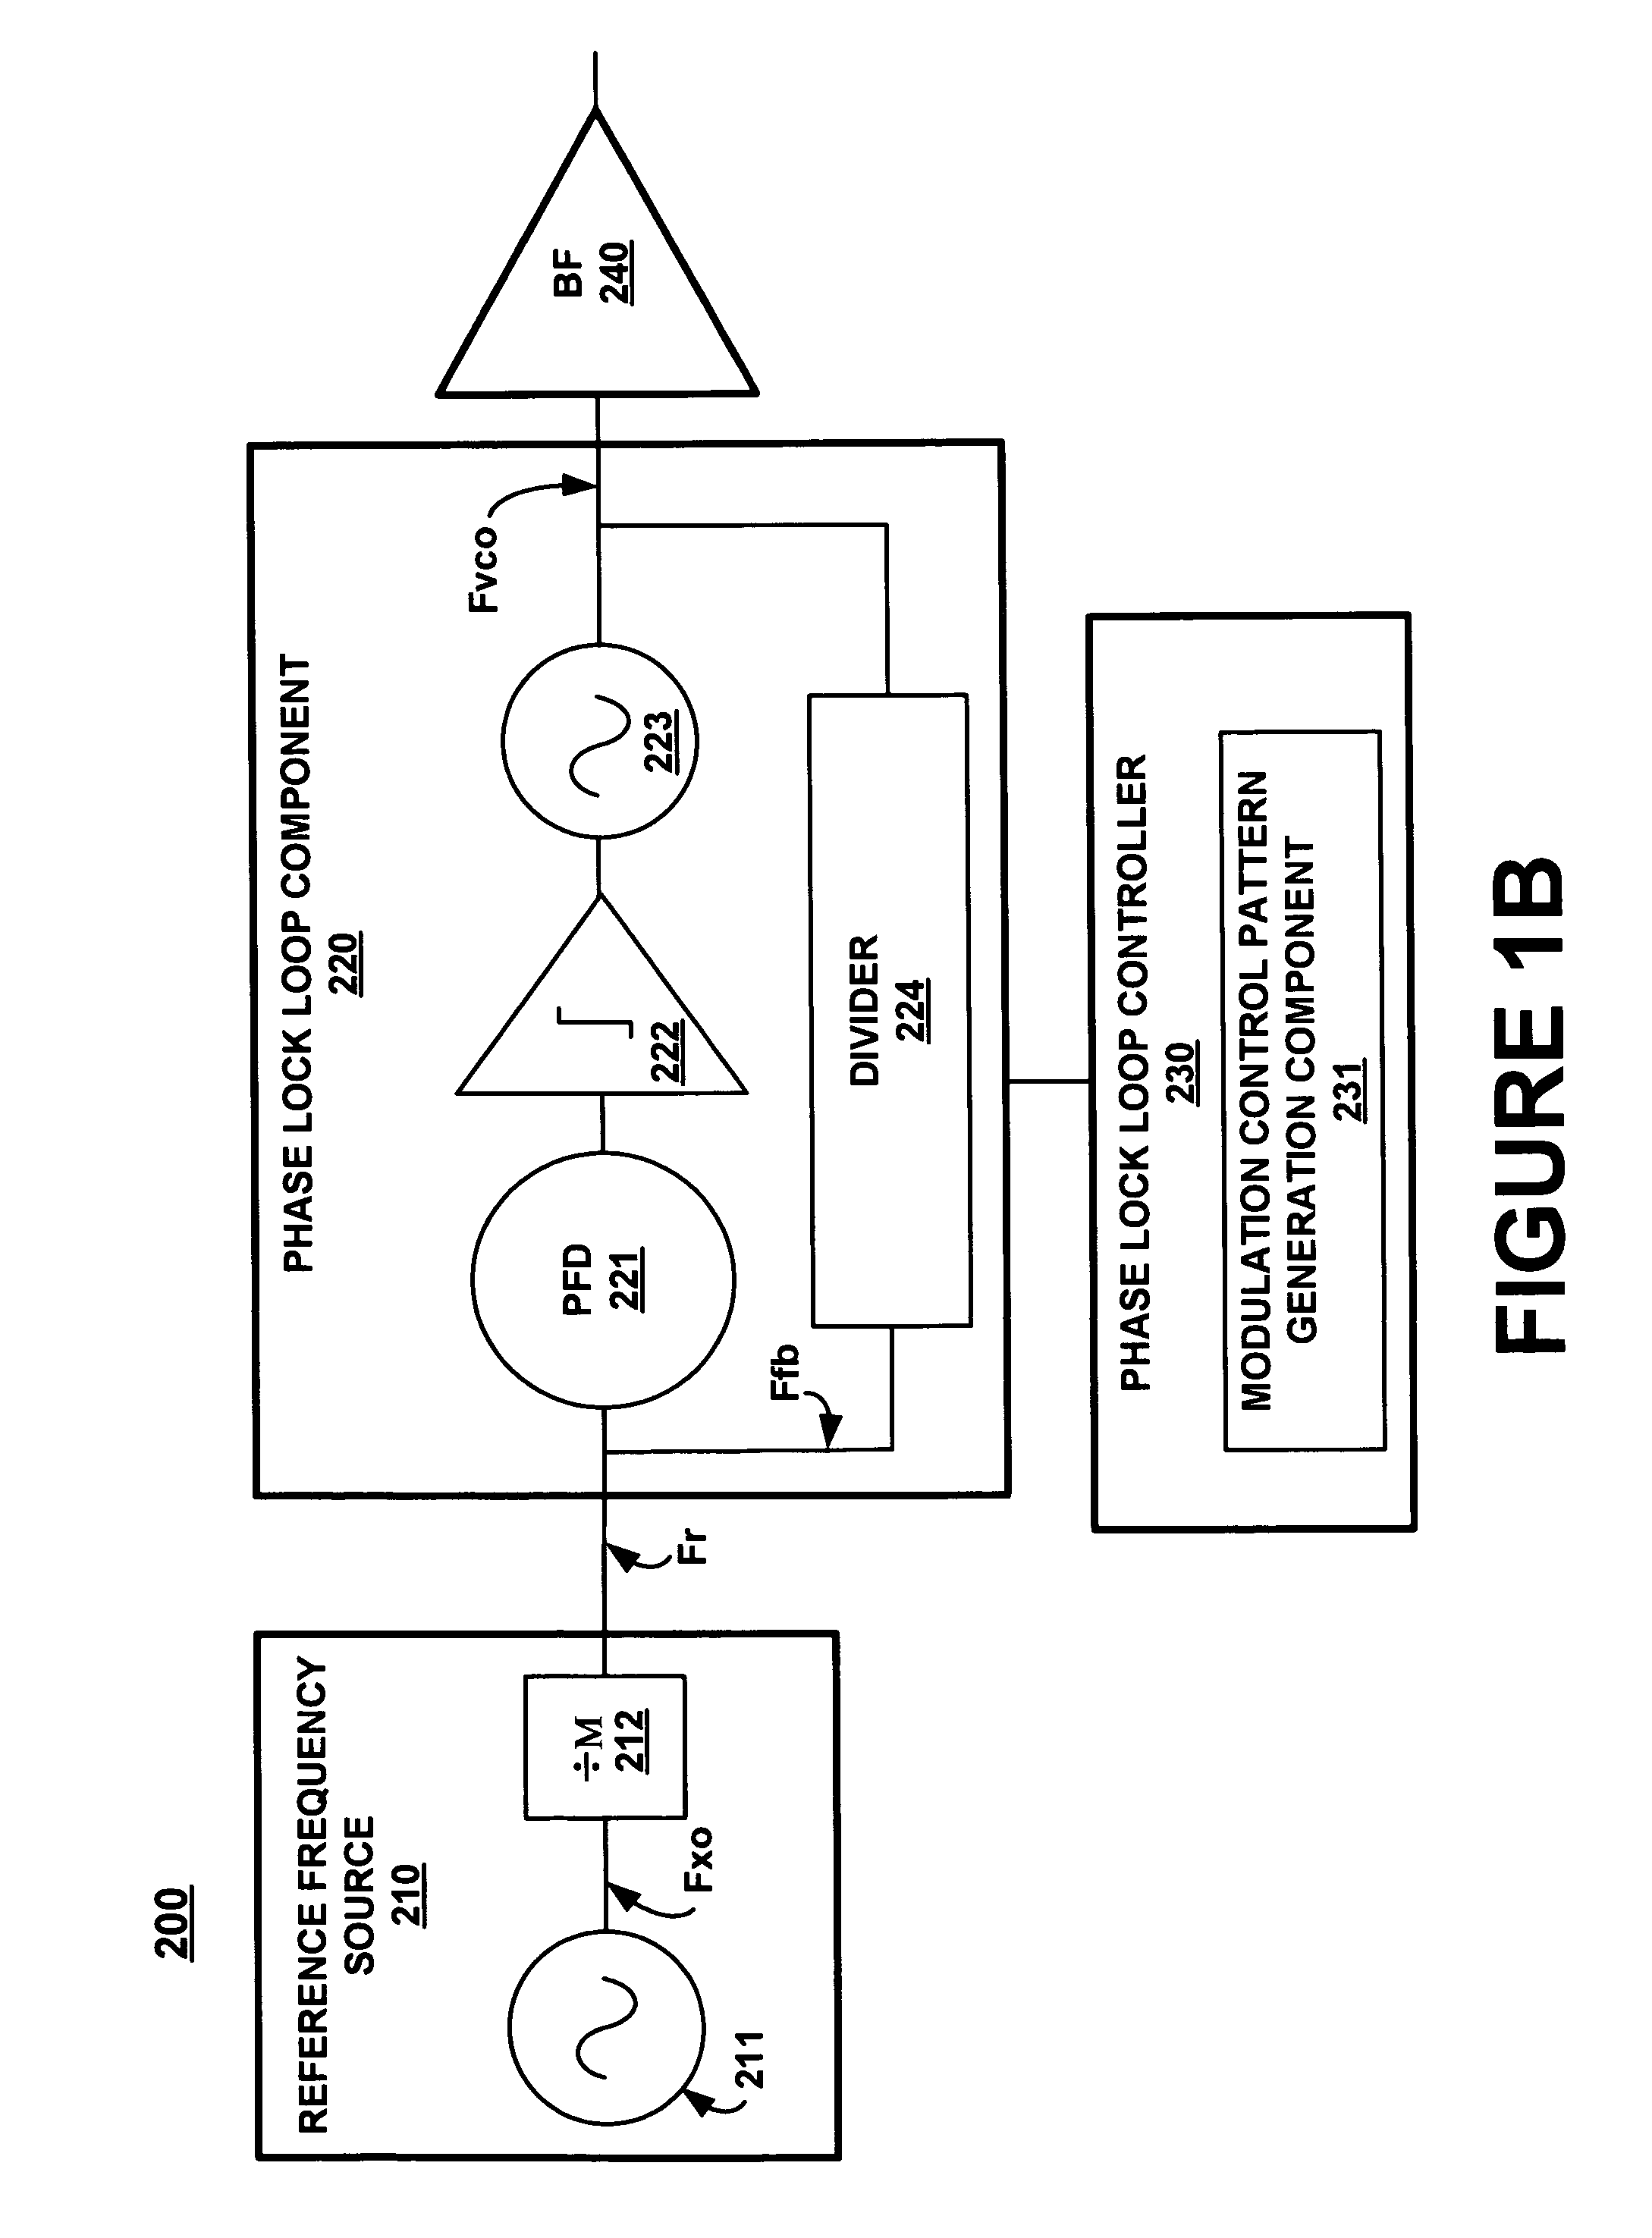 Phase lock loop control system and method with non-consecutive feedback divide values